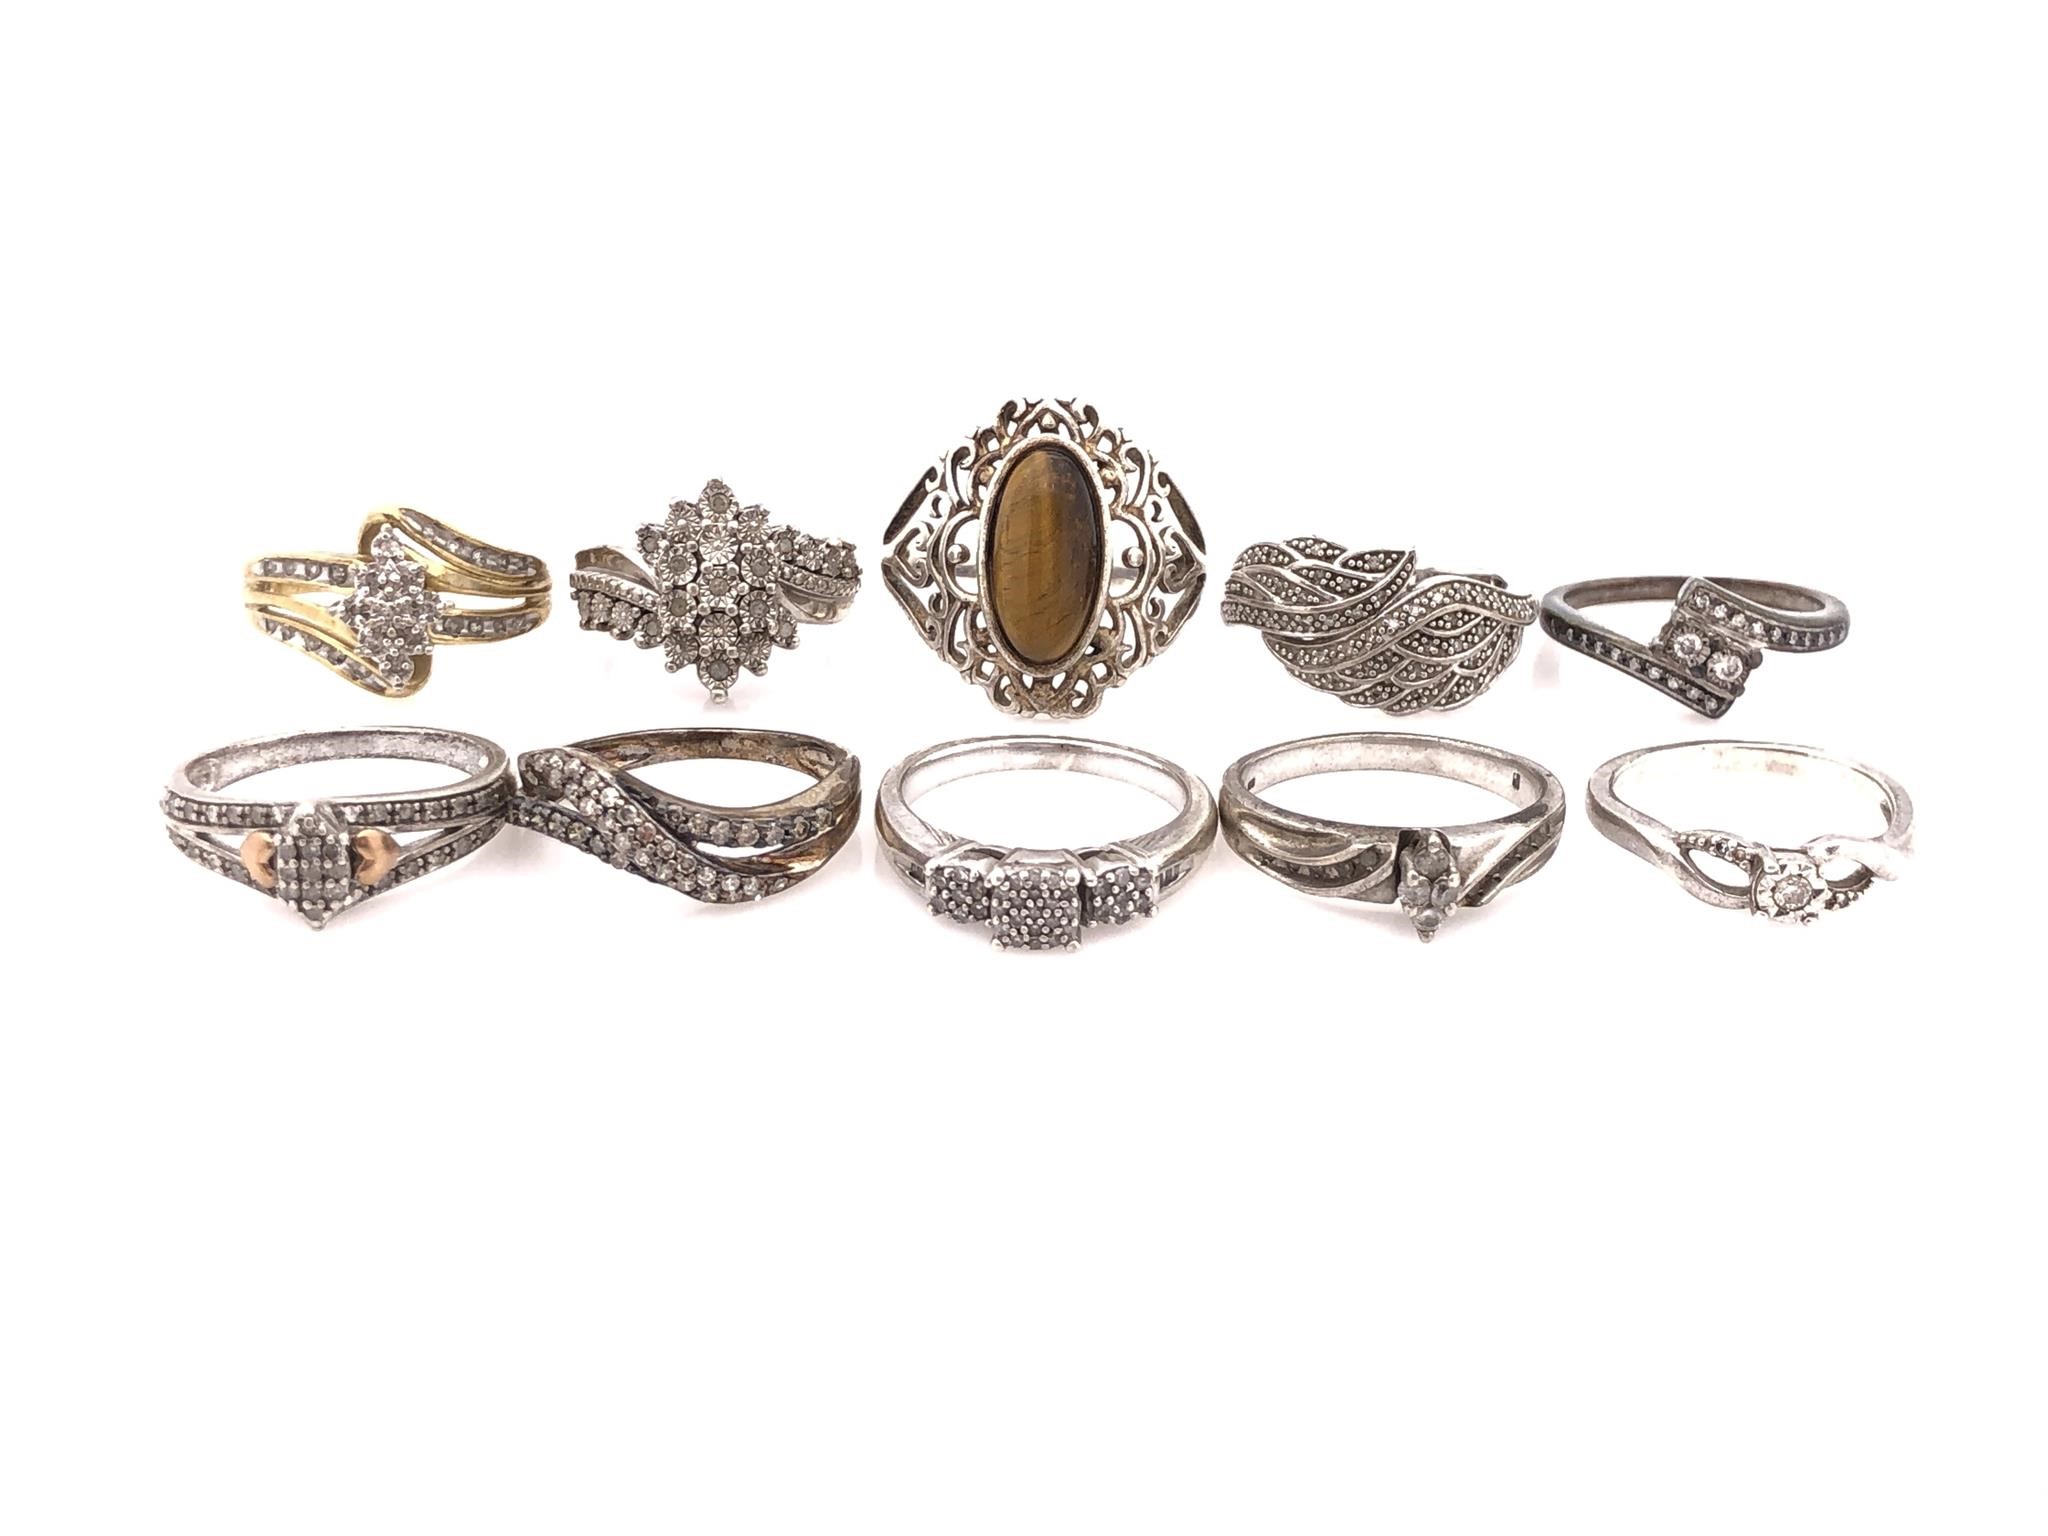 JEWELERS VAULT AUCTION! 650+ LOTS OF ESTATE JEWELRY 12-13-20